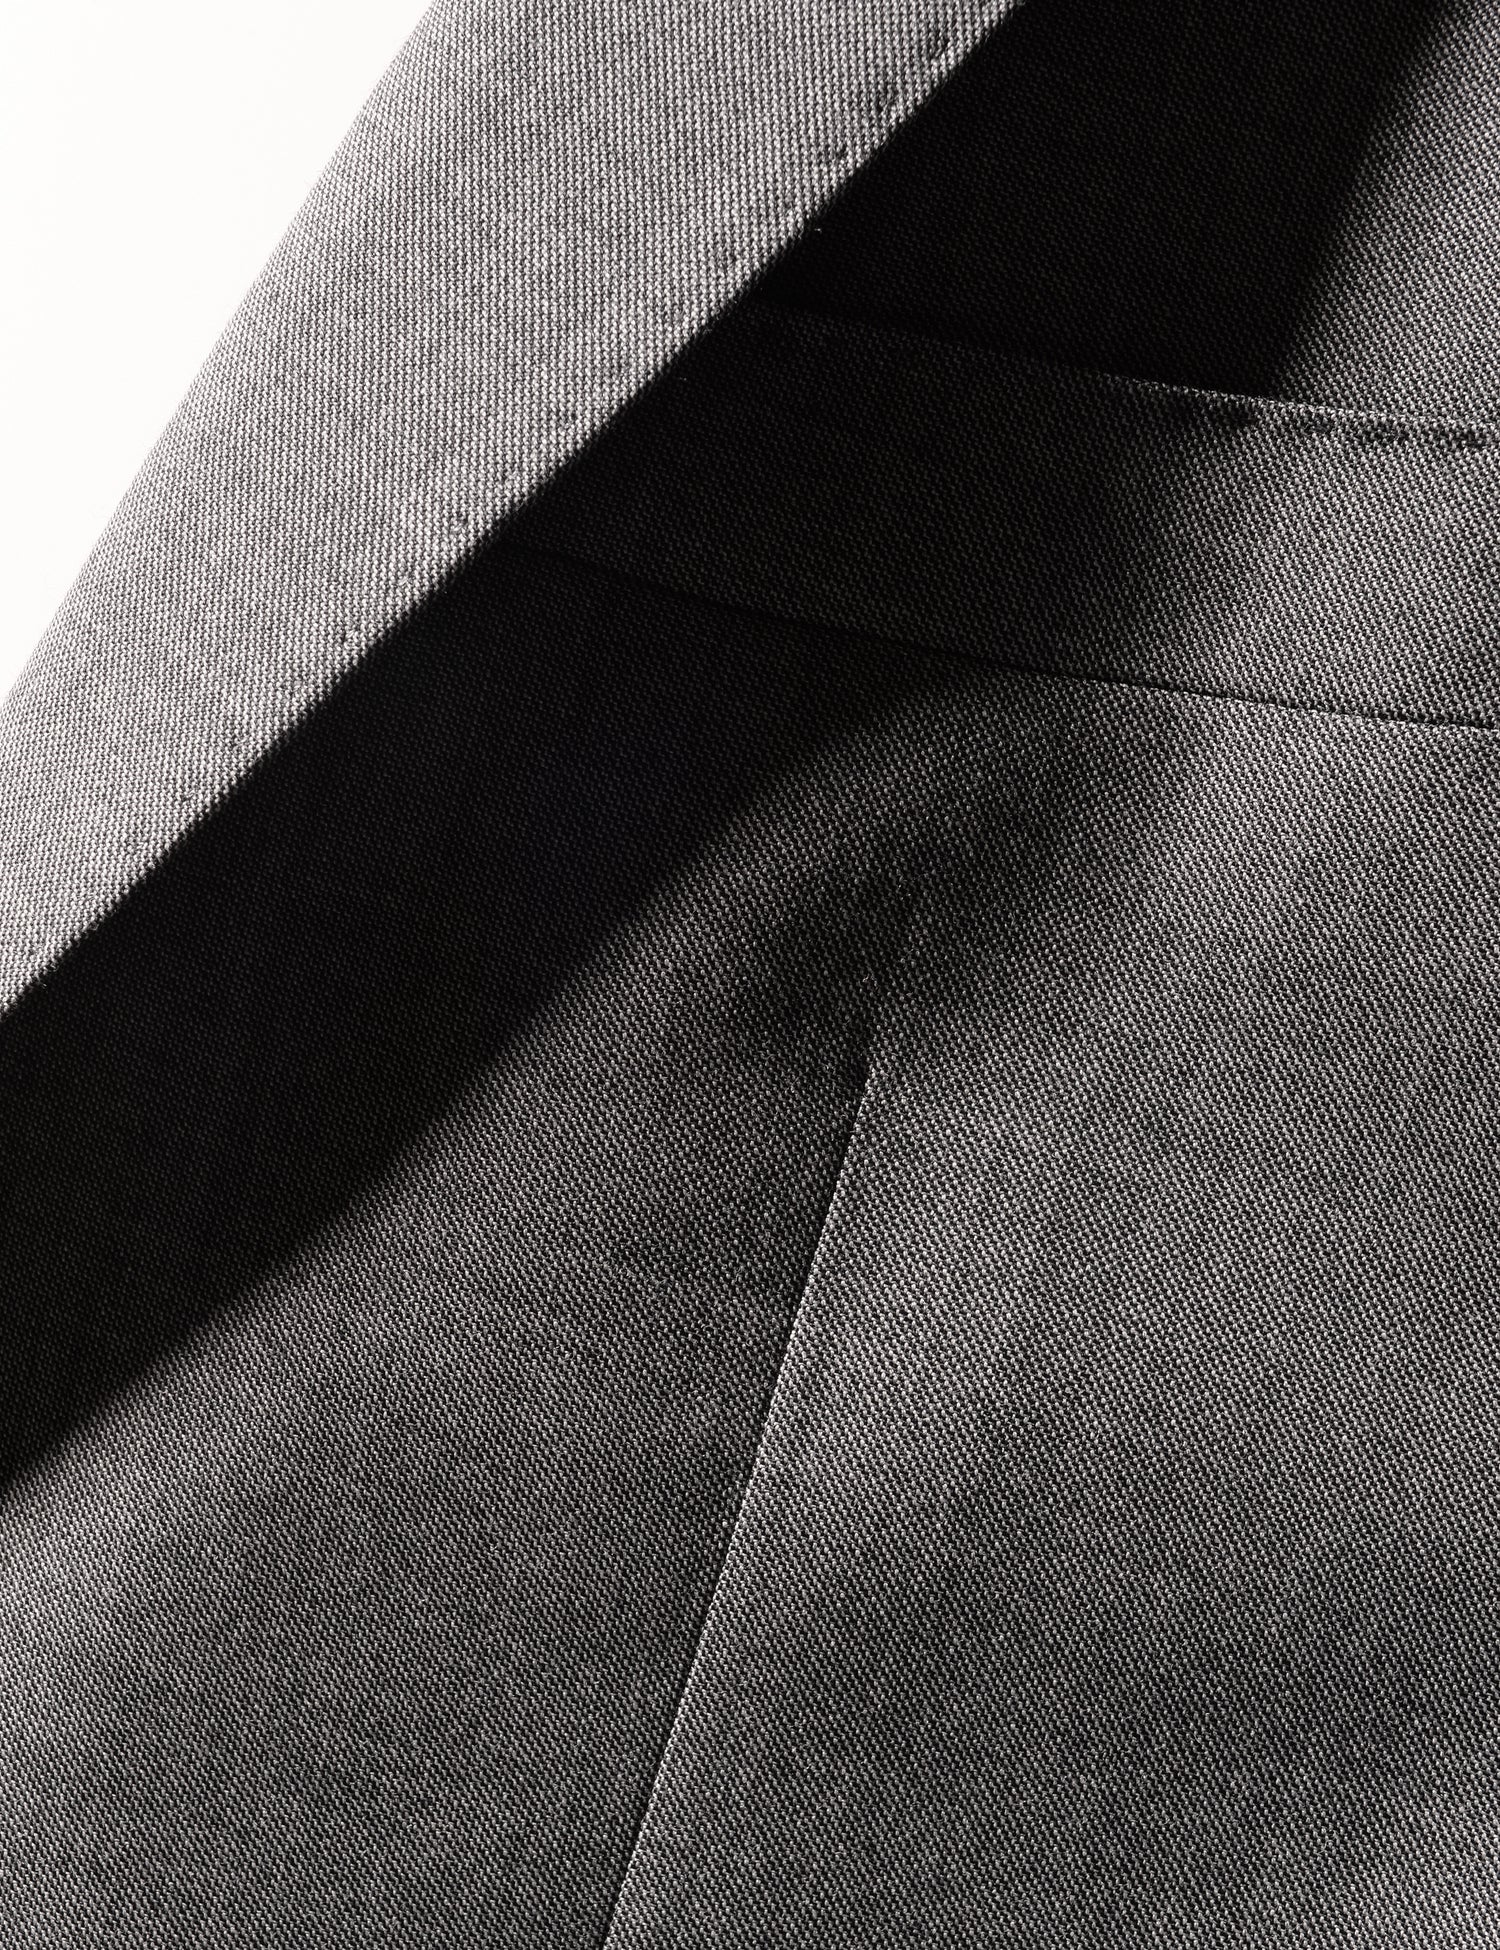 Detail shot of Brooklyn Tailors BKT50 Tailored Jacket in Wool Sharkskin - Salt and Pepper Gray showing lapel and fabric texture